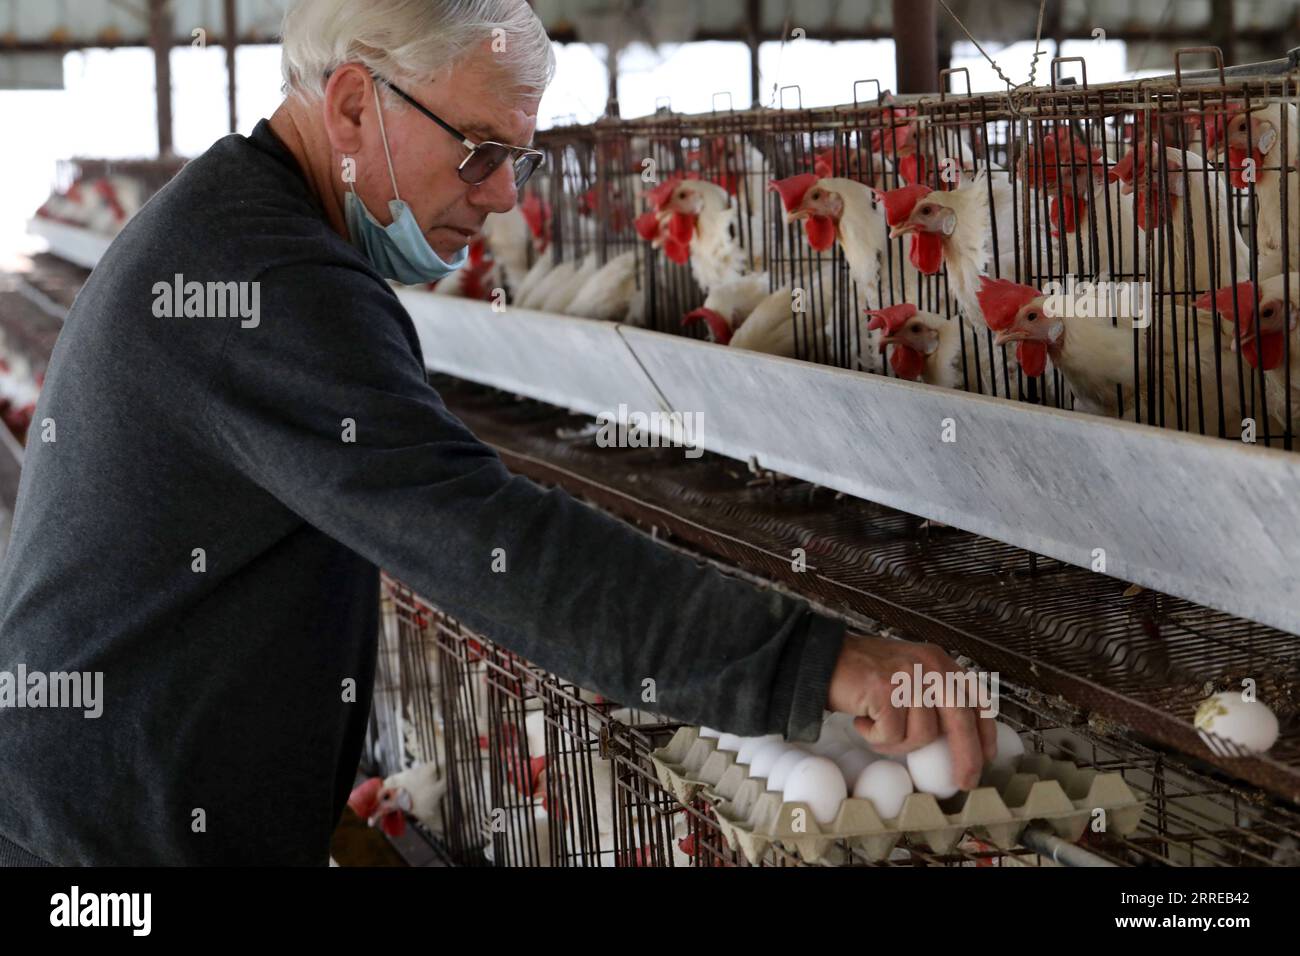 220216 -- KIRYAT MALAKHI, Feb. 16, 2022 -- An Israeli agriculturist collects eggs from White Leghorn egg-laying chickens in cages in their hen house at Arugot village near Israeli city of Kiryat Malakhi on Feb. 15, 2022. Israel s Ministry of Agriculture and Rural Development on Monday announced new regulations regarding the use of hen cages in the egg industry. The regulations stipulate that from now on every new hen coop must be without cages, and from June 2029, any use of cage coops in the country will be banned. Photo by /Xinhua ISRAEL-KIRYAT MALAKHI-CHICKENS GilxCohenxMagen PUBLICATIONxNO Stock Photo